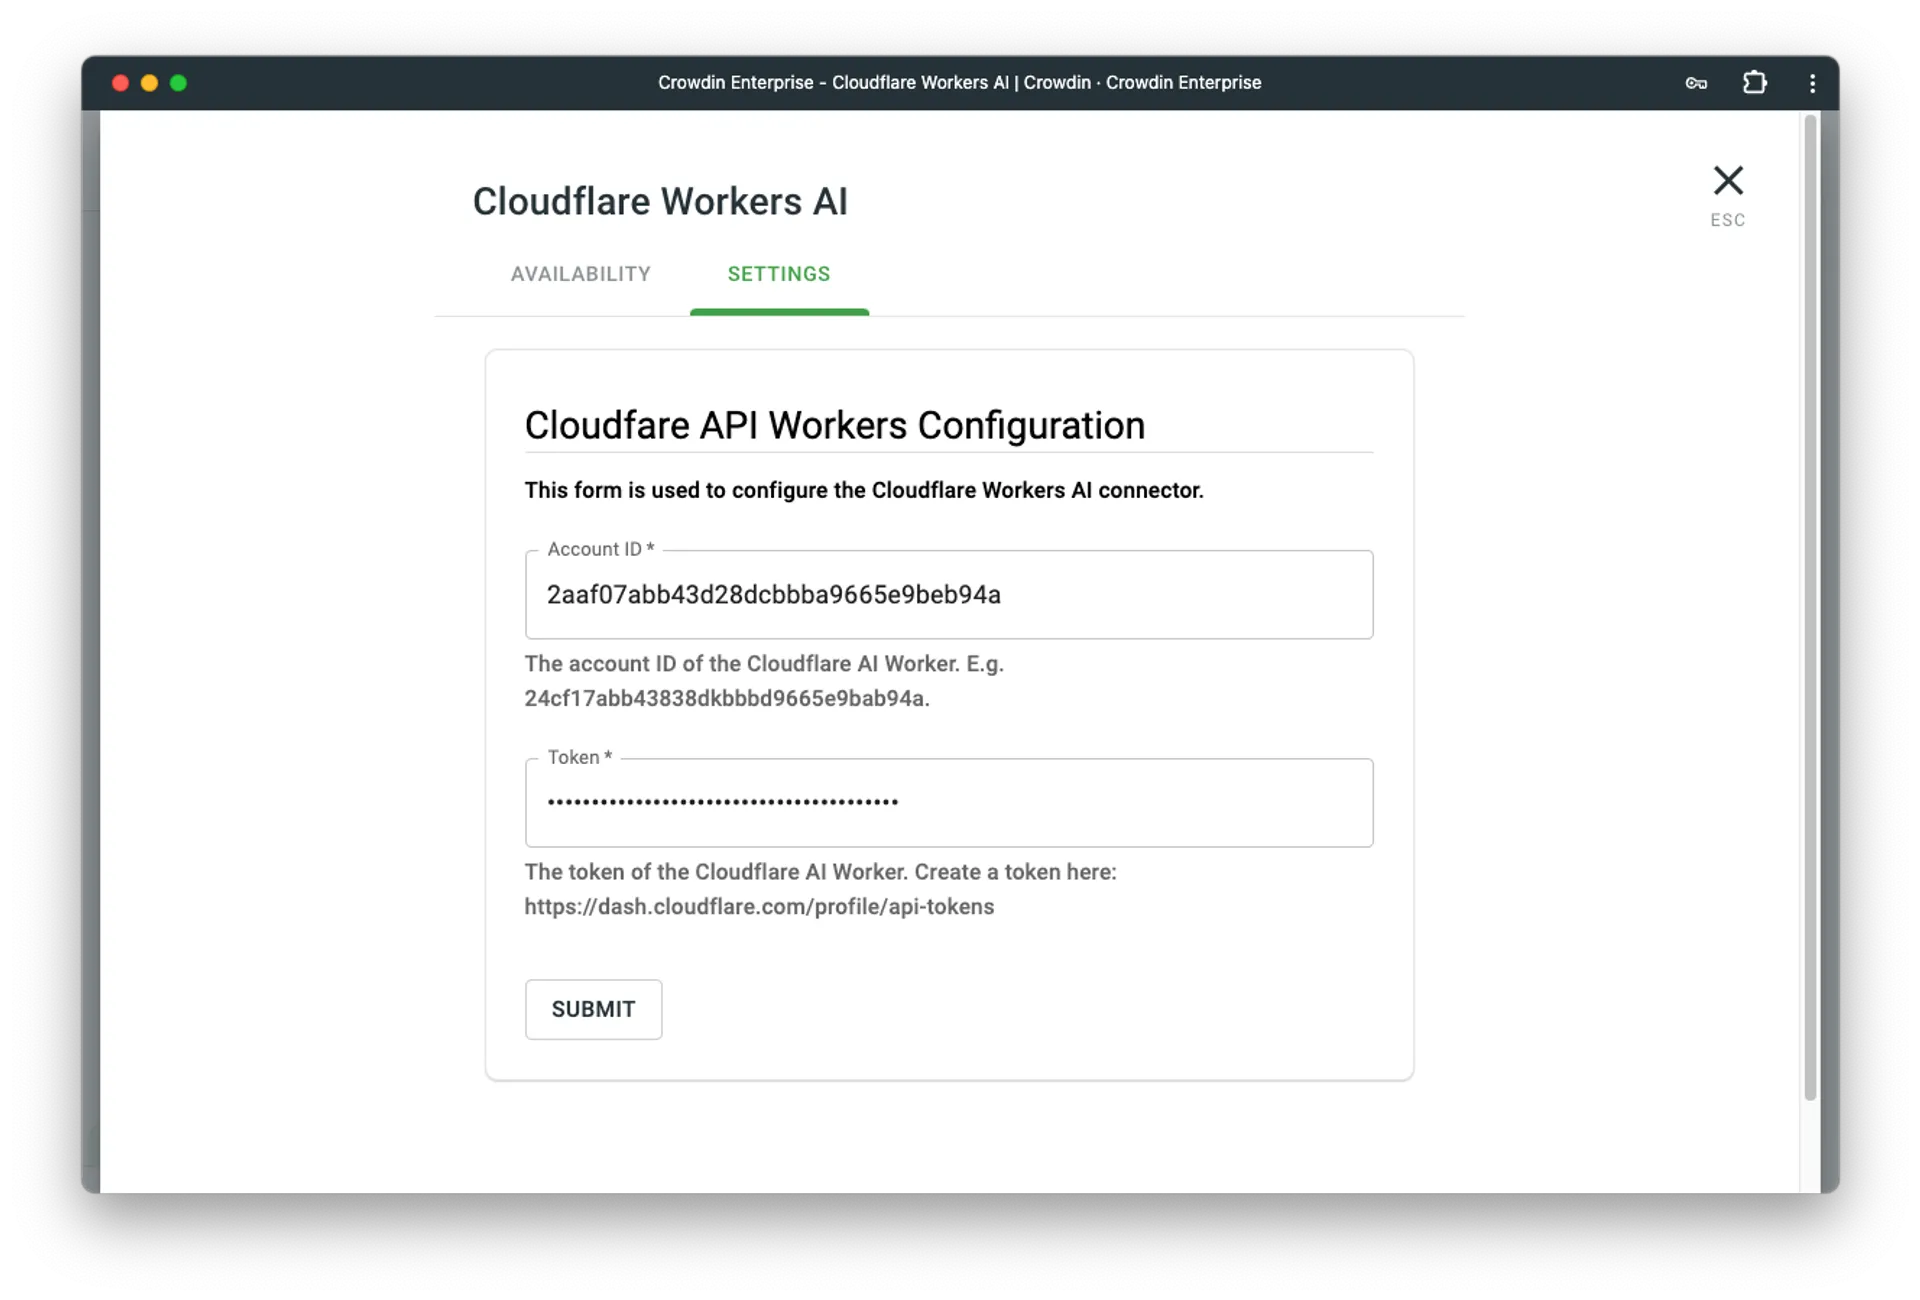 Configuring Cloudflare AI Workers in Crowdin